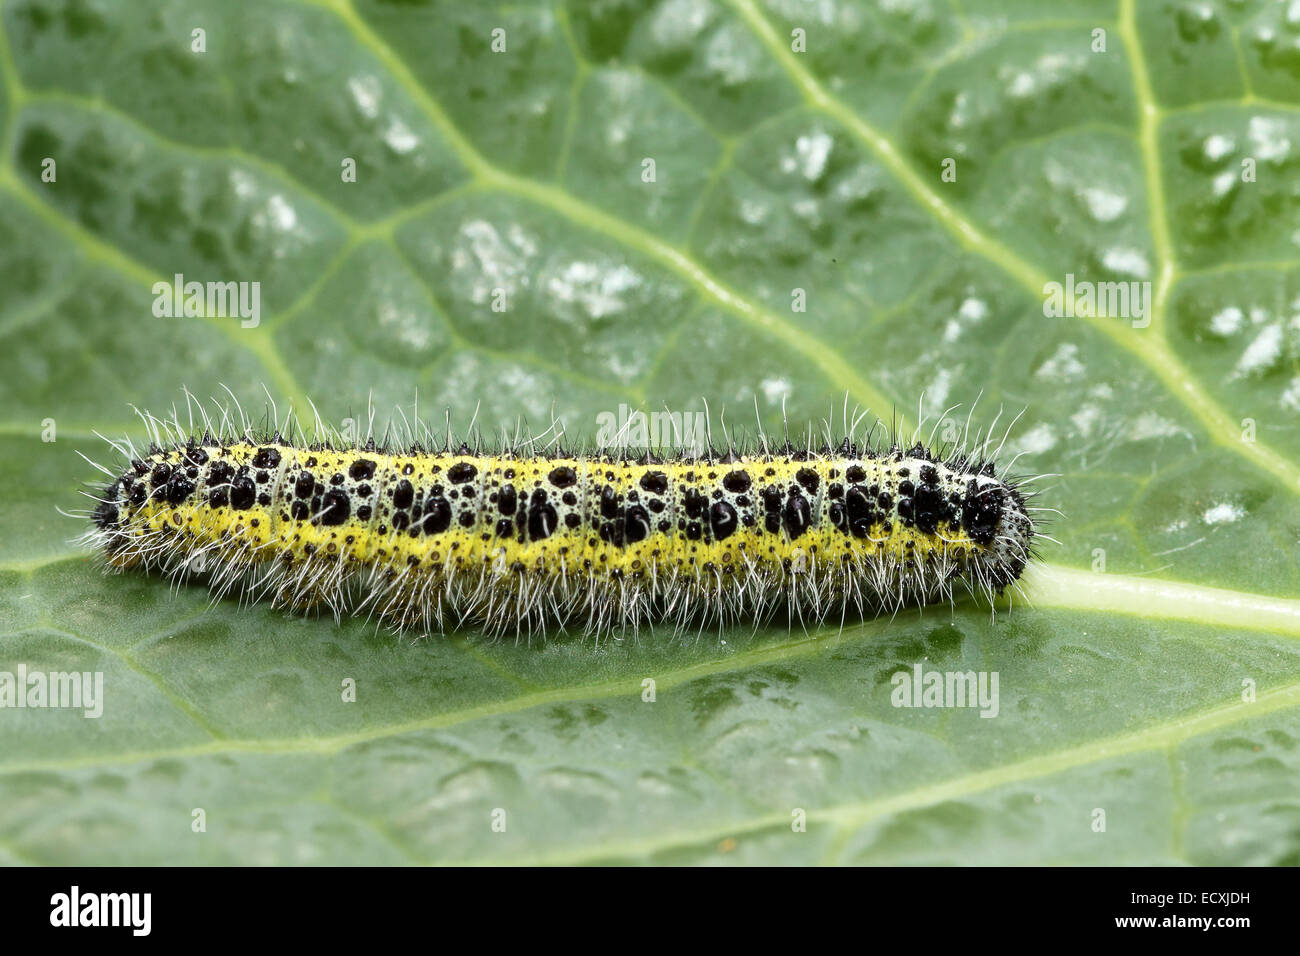 Side view of a caterpillar of large cabbage white butterfly, Pieris brassicae, on a leaf of savoy cabbage Stock Photo